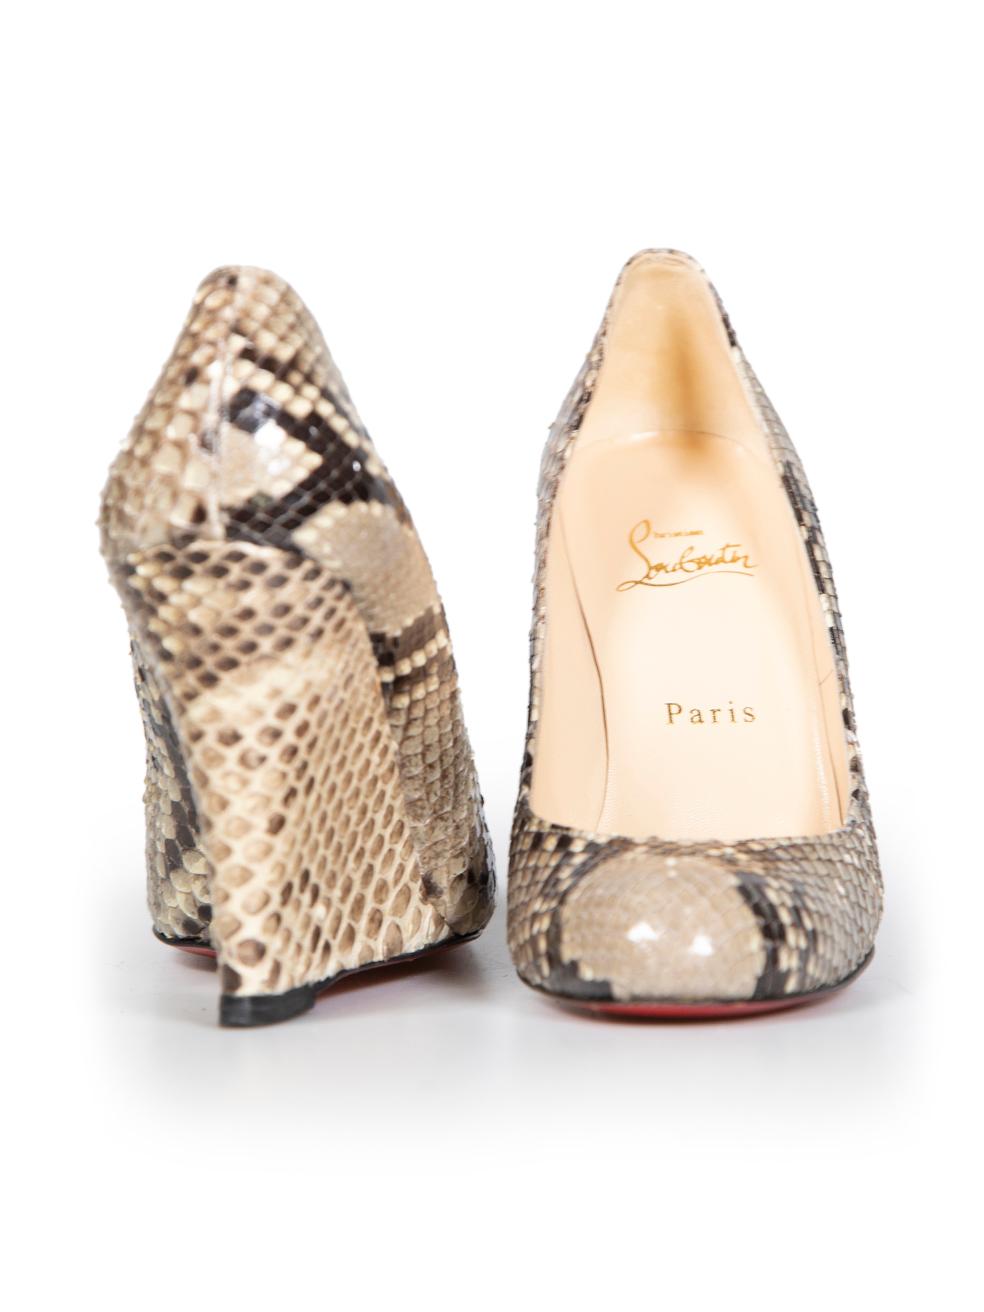 Christian Louboutin Brown Python Ron Ron Wedge Pumps Size IT 37 In Good Condition For Sale In London, GB